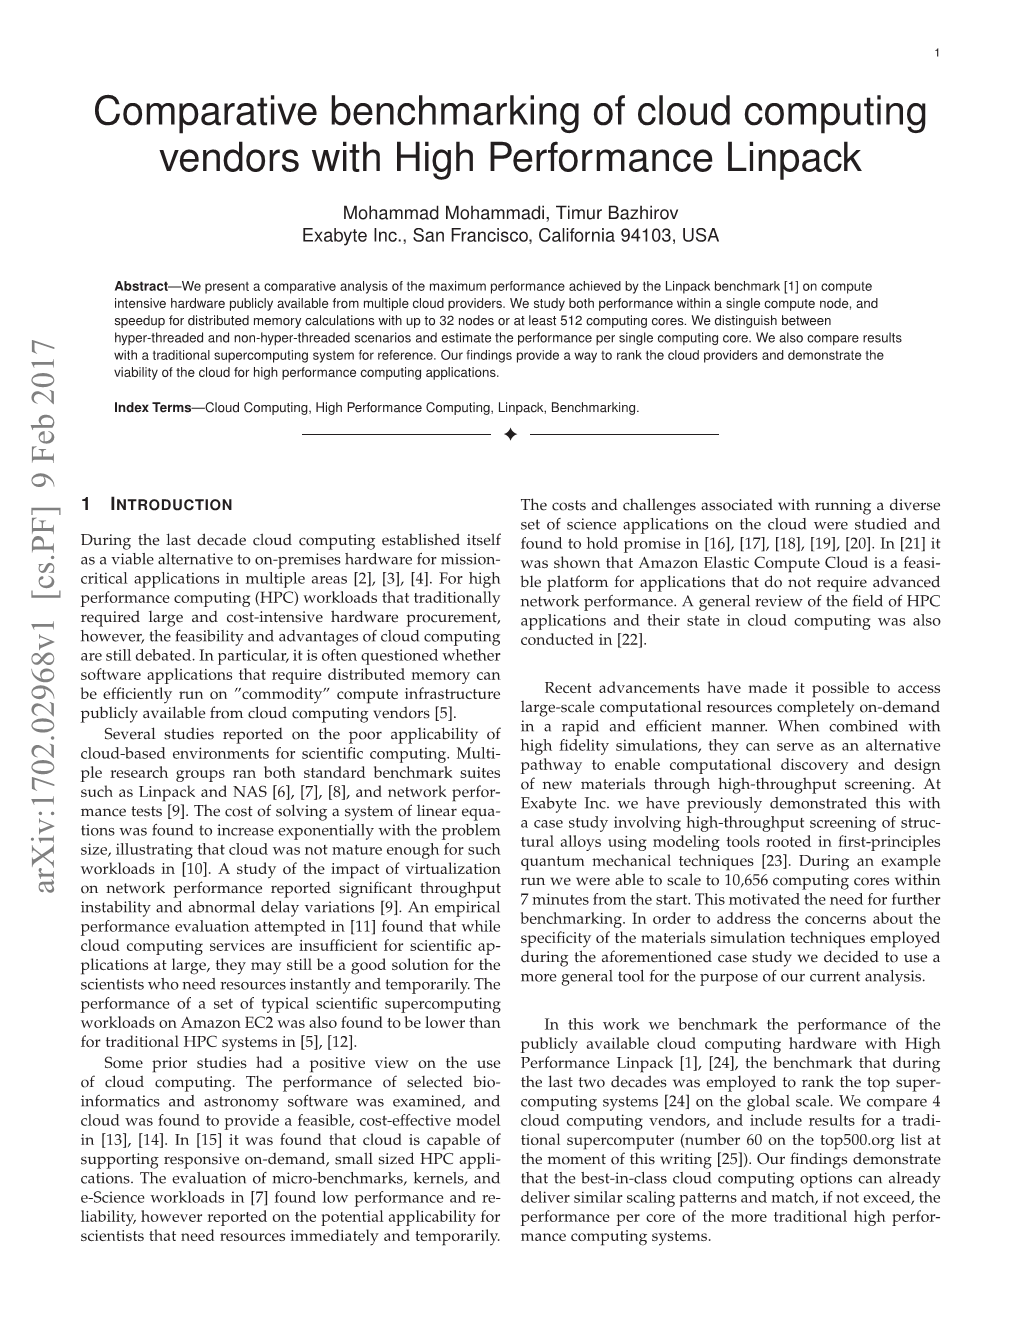 Comparative Benchmarking of Cloud Computing Vendors with High Performance Linpack